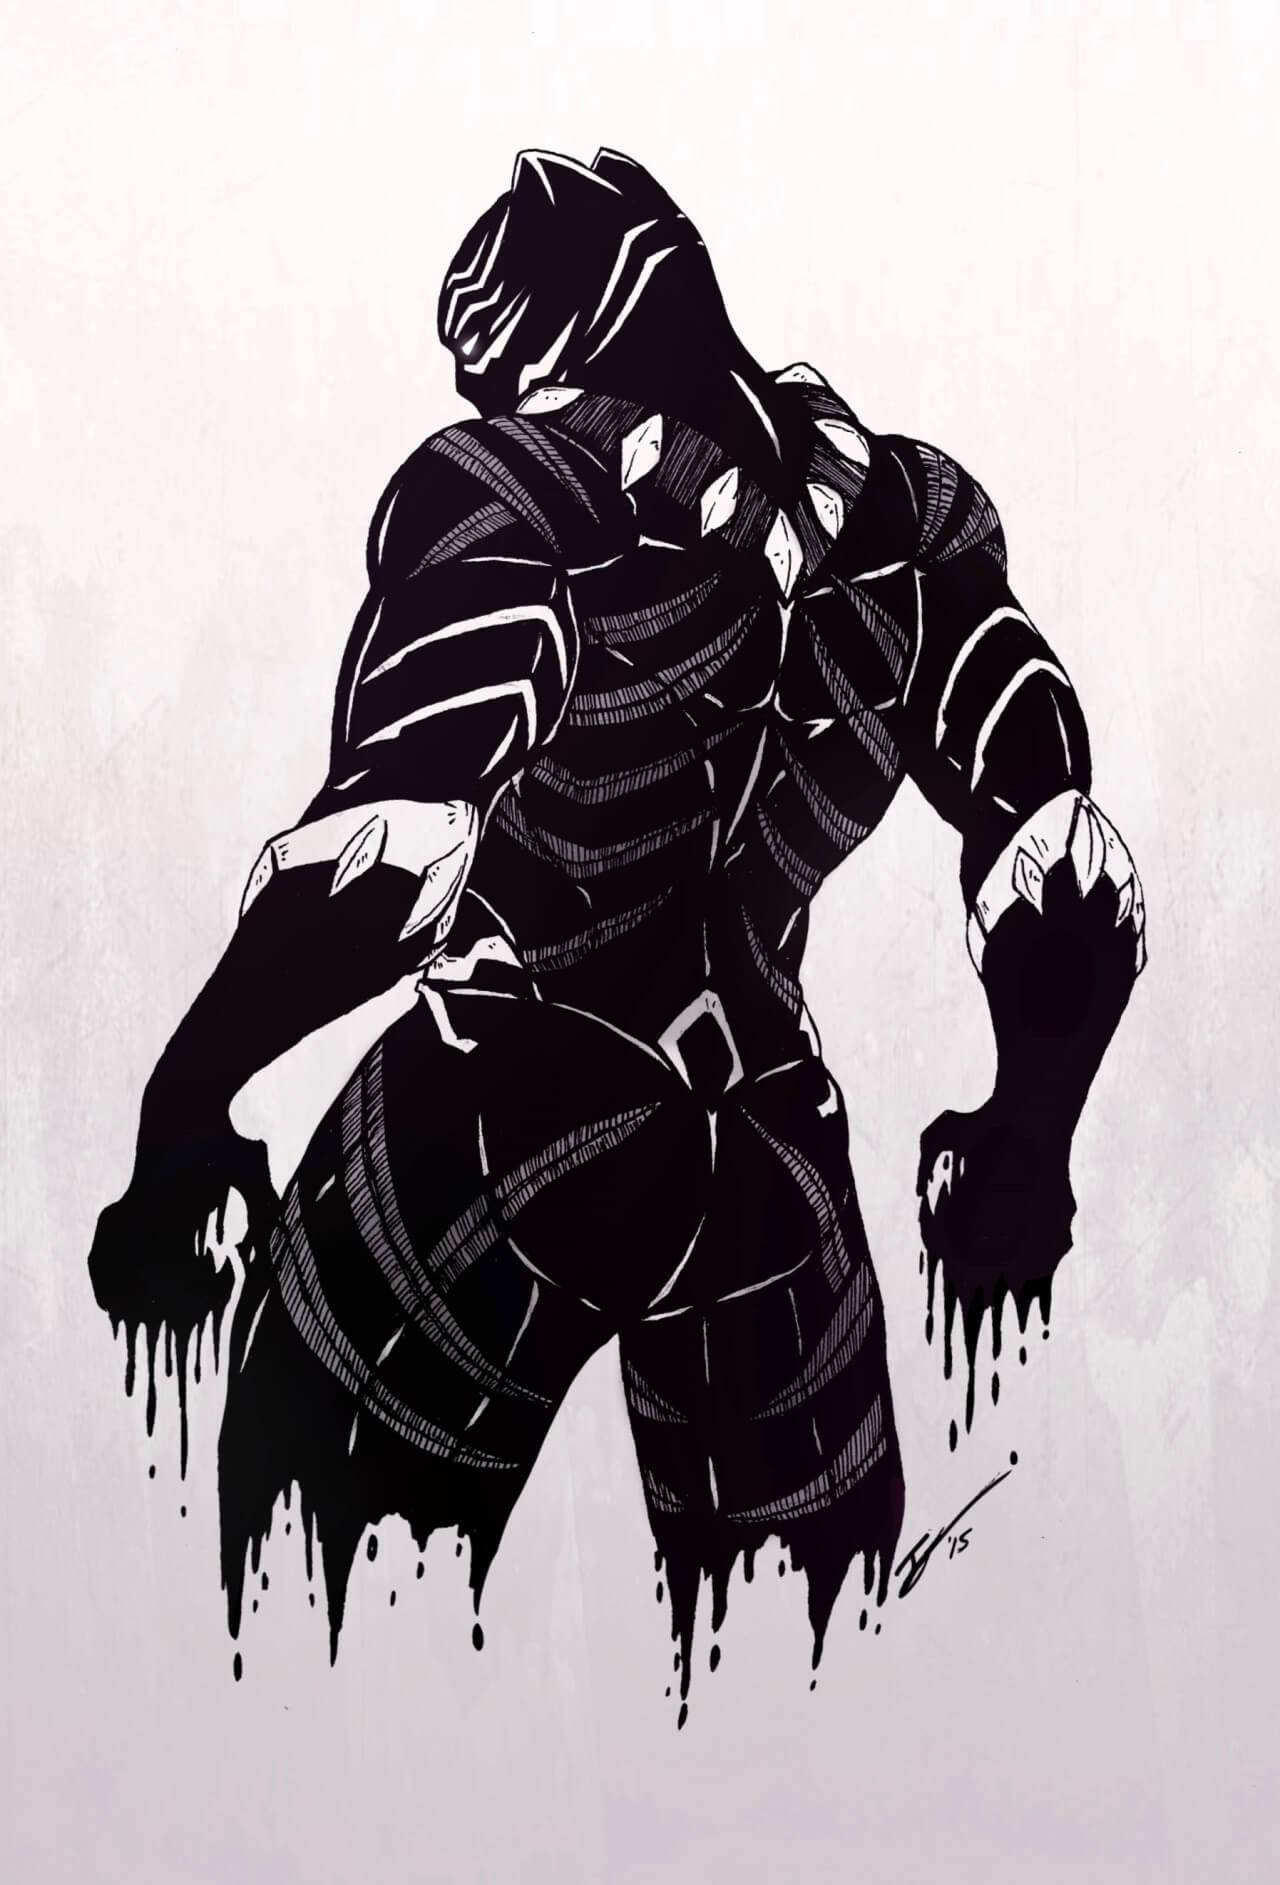 Black Panther Marvel comic character in melting effect.